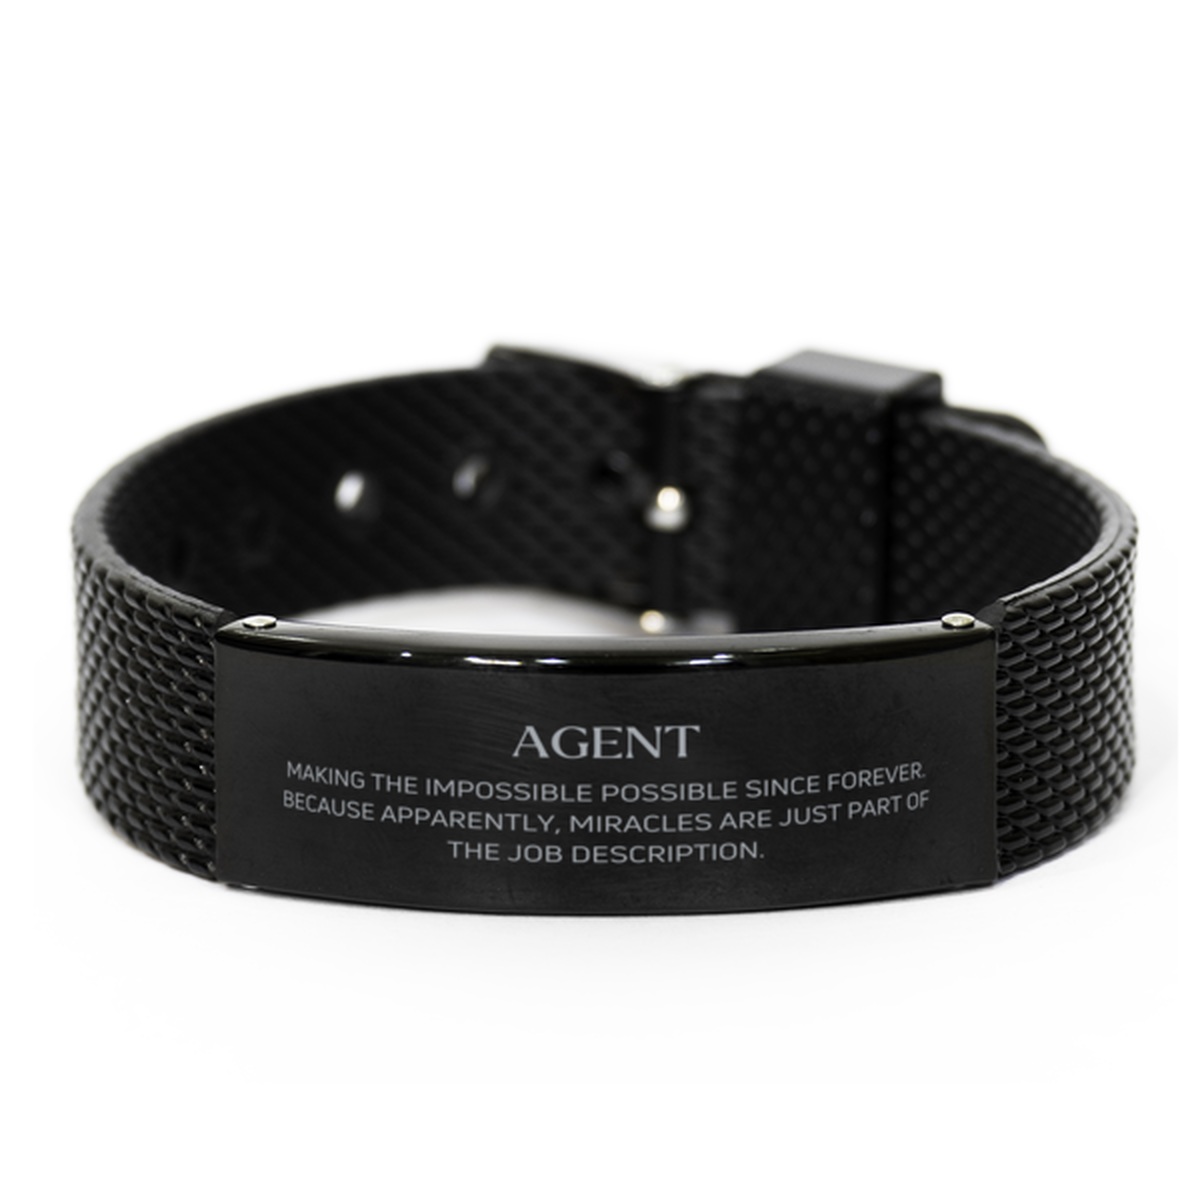 Funny Agent Gifts, Miracles are just part of the job description, Inspirational Birthday Black Shark Mesh Bracelet For Agent, Men, Women, Coworkers, Friends, Boss